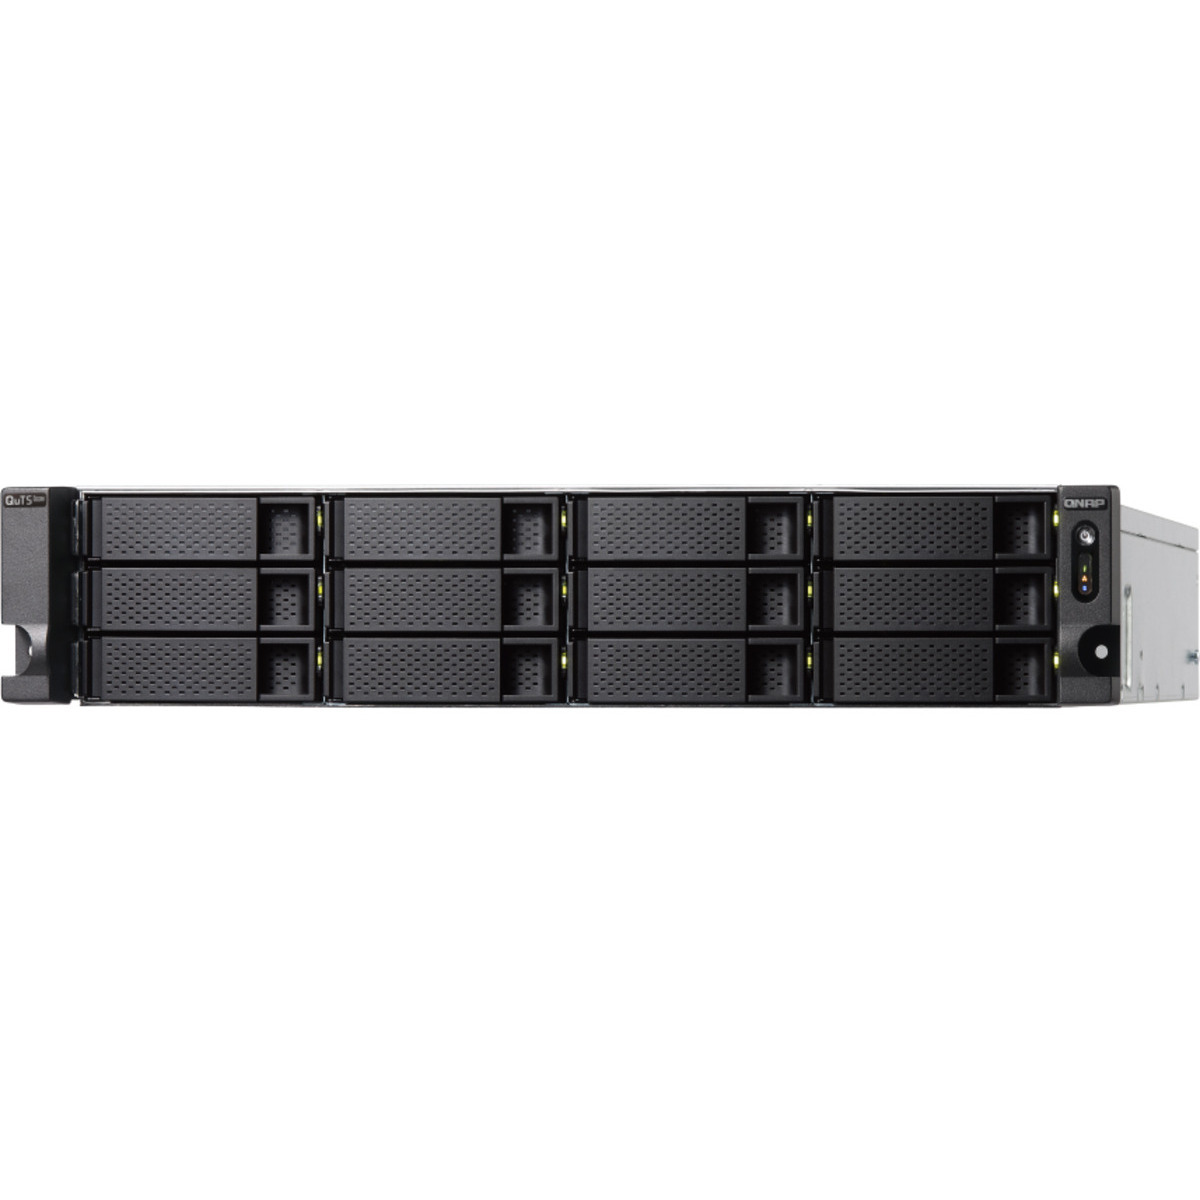 QNAP TS-h1886XU-RP R2 QuTS hero Edition 48tb 12+6-Bay RackMount Large Business / Enterprise NAS - Network Attached Storage Device 8x6tb Western Digital Red Plus WD60EFPX 3.5 5640rpm SATA 6Gb/s HDD NAS Class Drives Installed - Burn-In Tested TS-h1886XU-RP R2 QuTS hero Edition